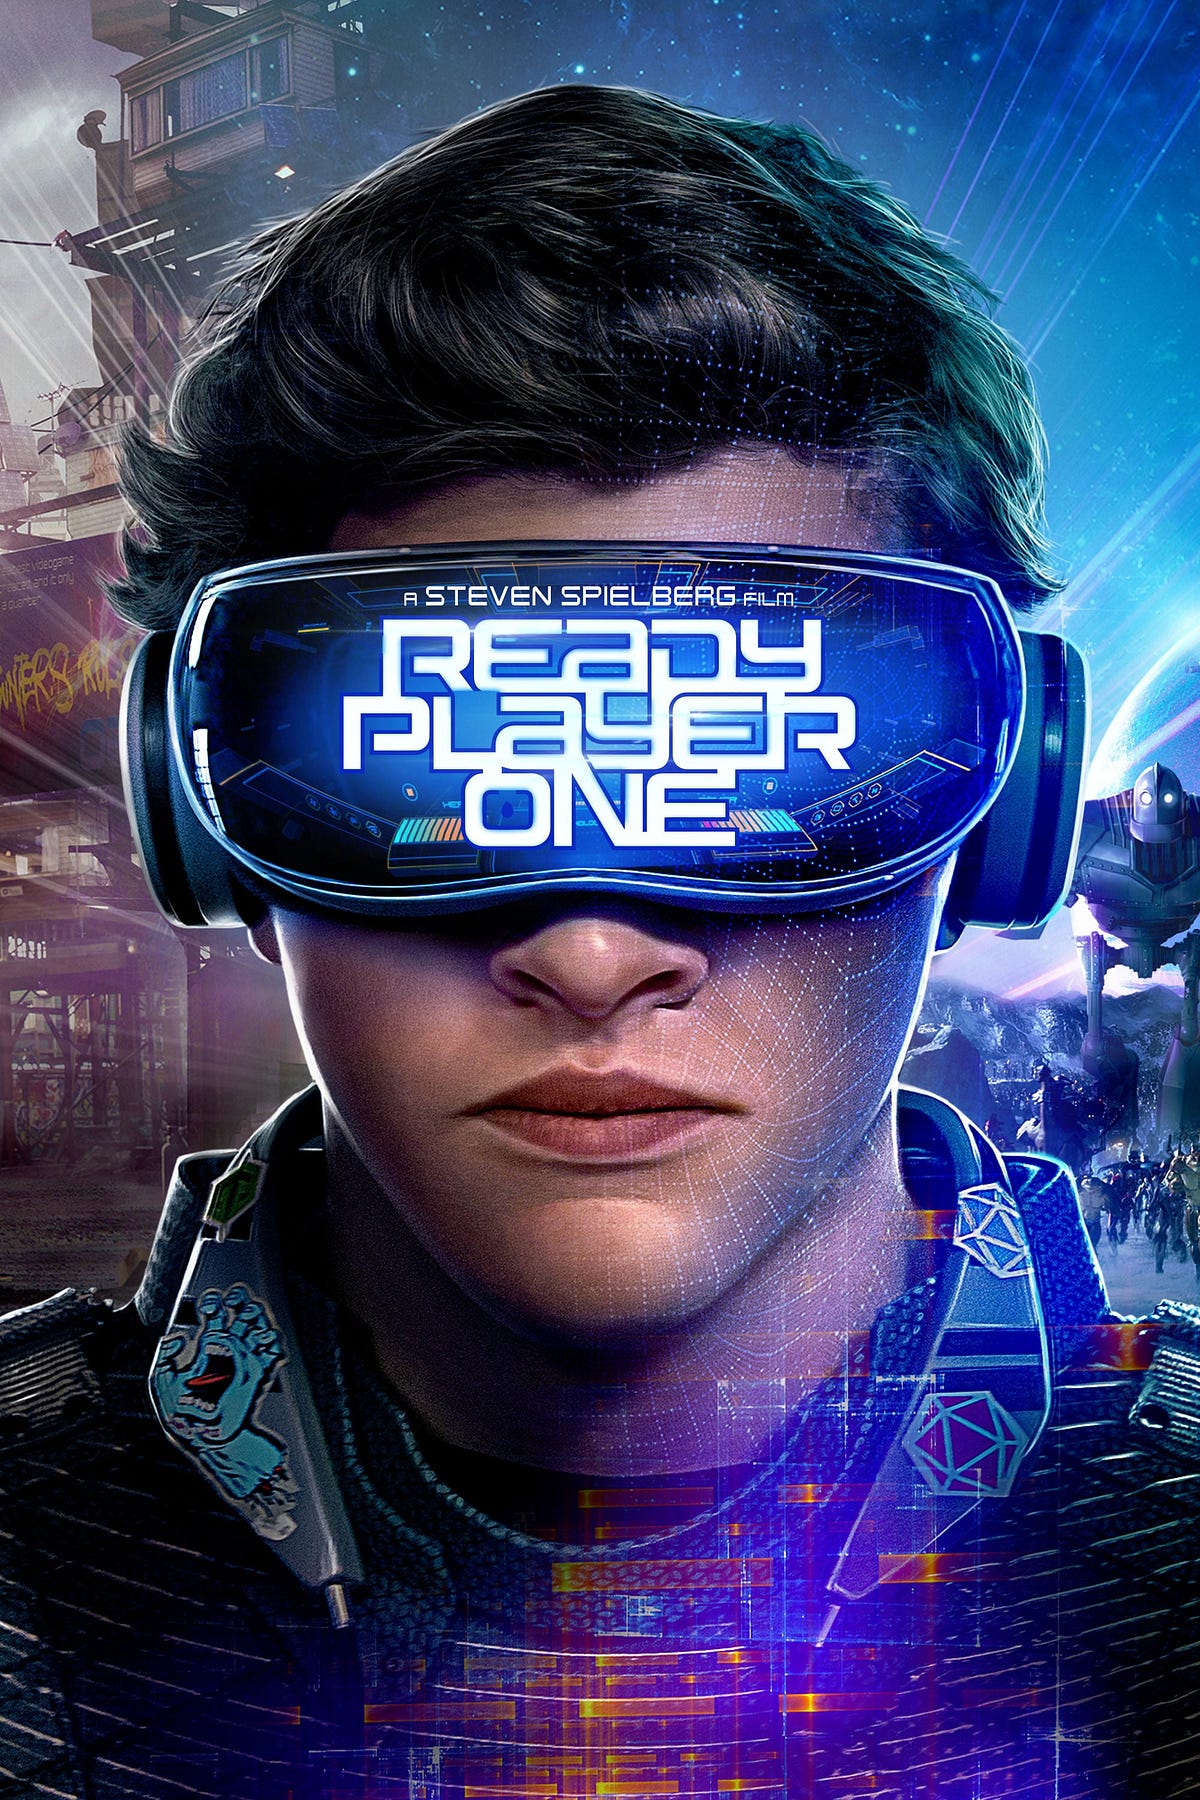 Ready Player One – do you buy Spielberg's vision of virtual reality?  Discuss with spoilers, Ready Player One